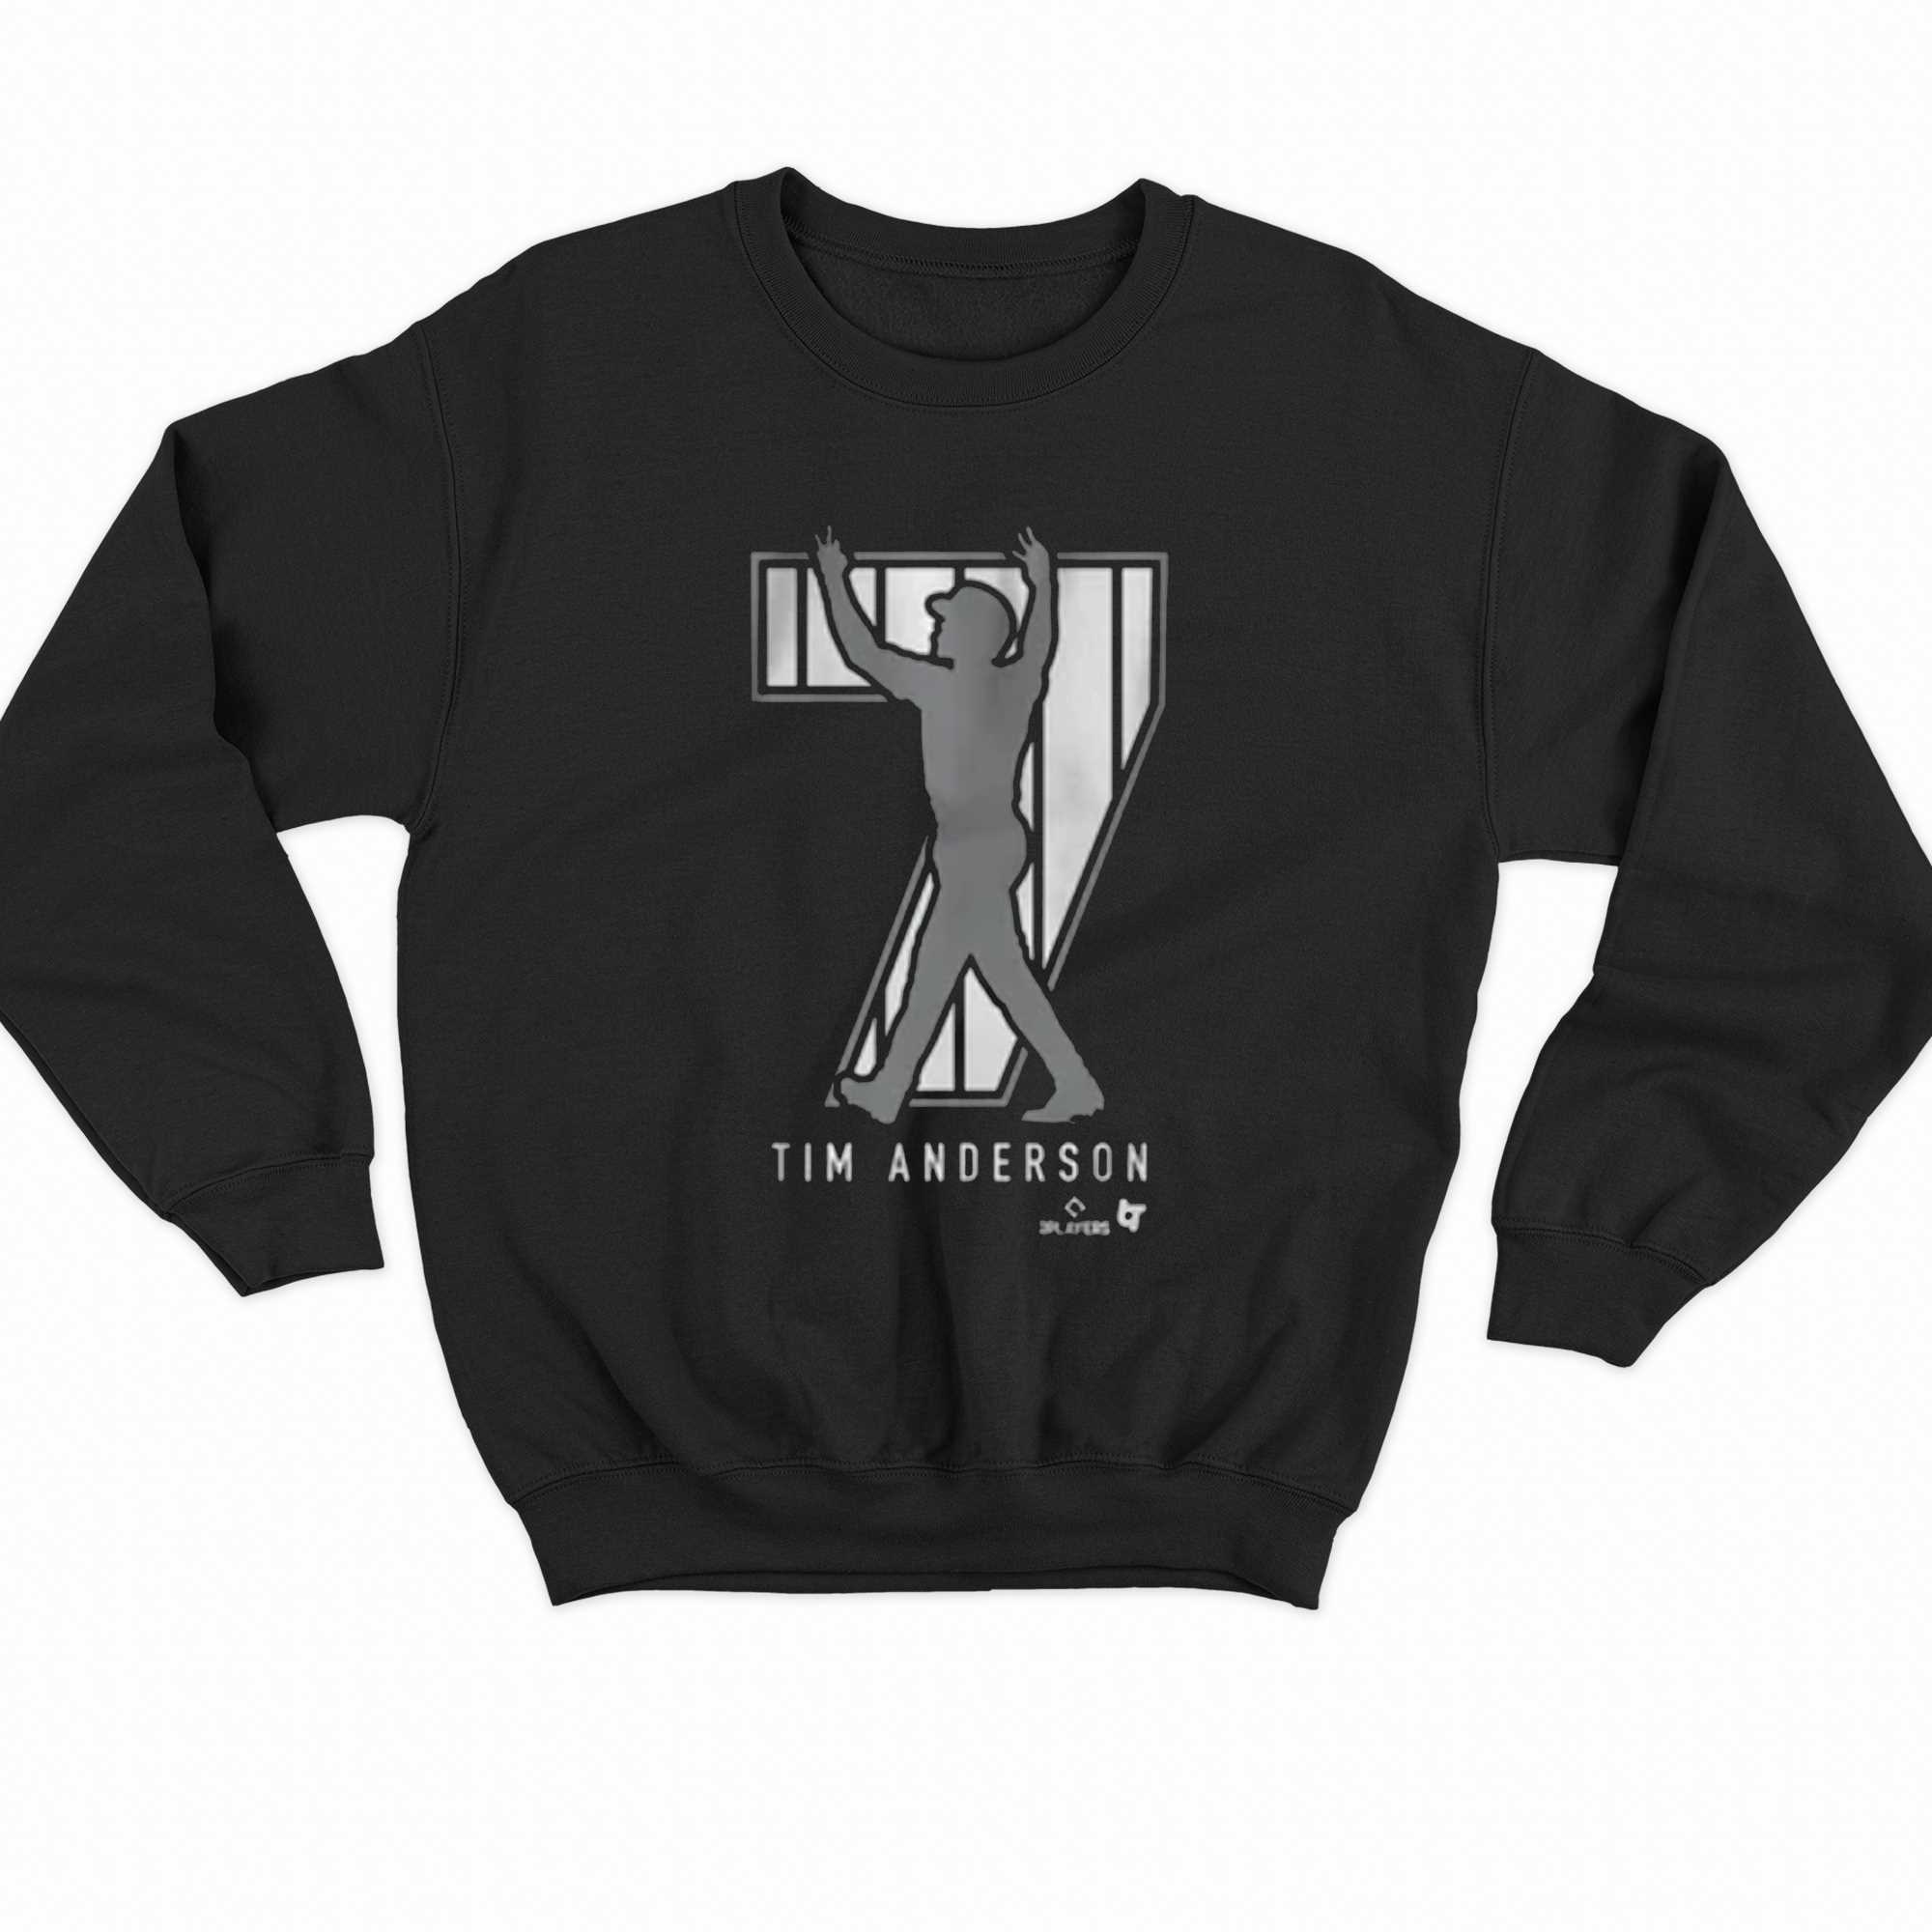 Tim Anderson 7 Chicago T-shirt 